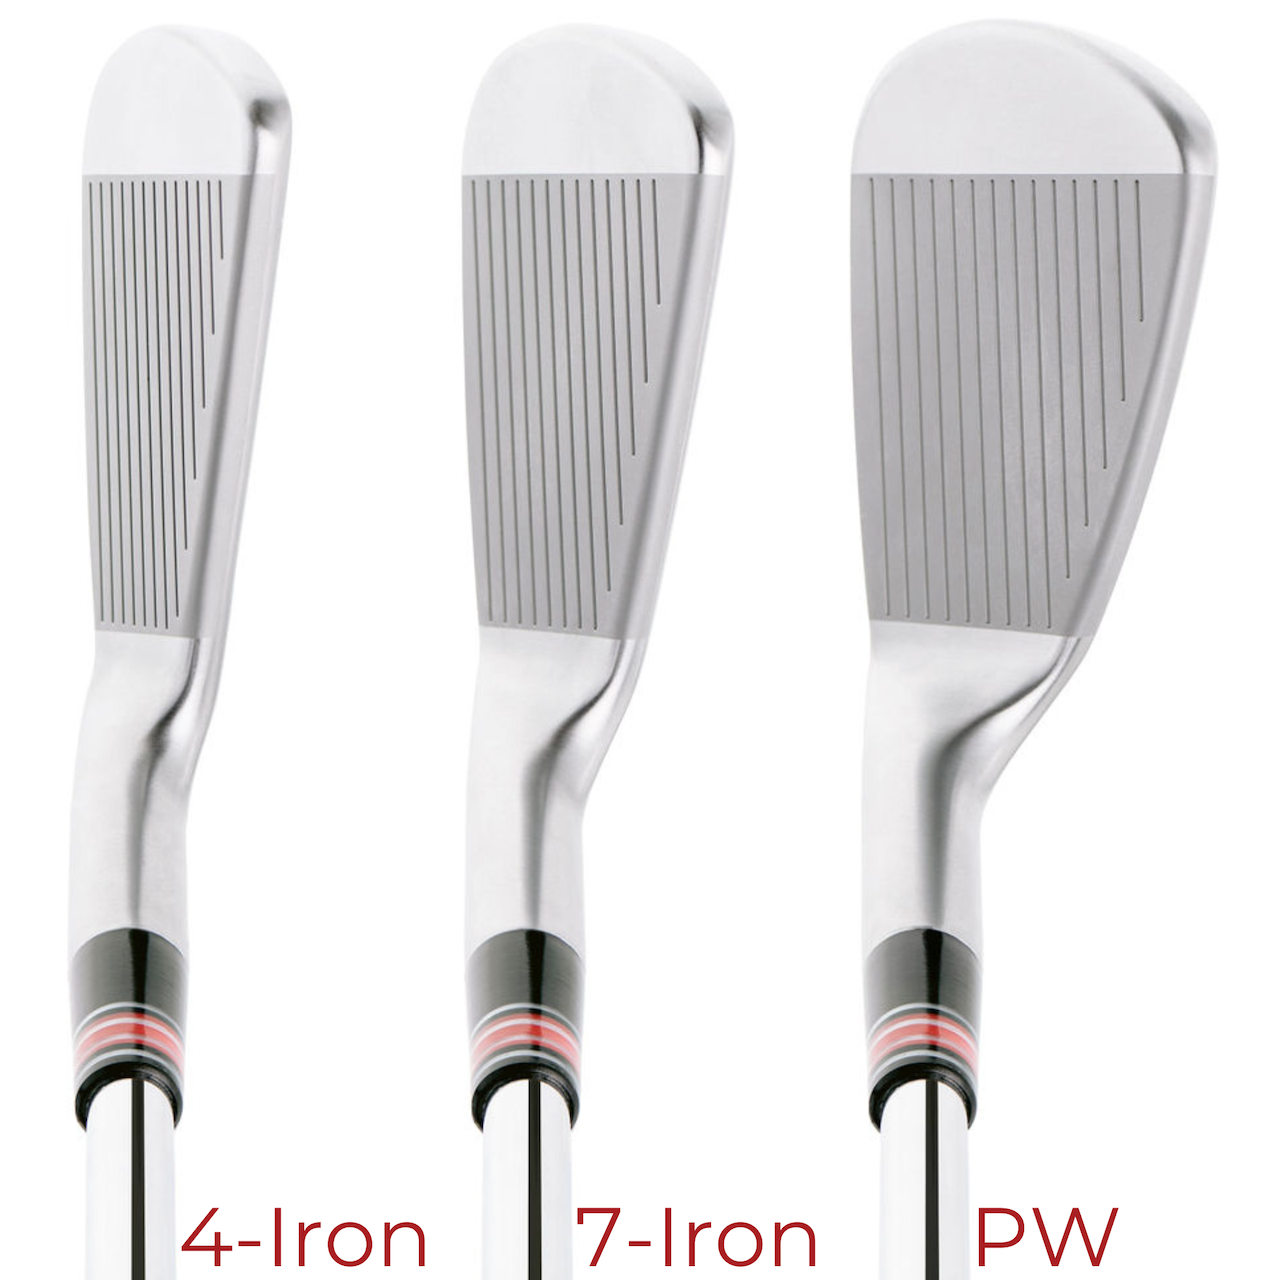 Edel Golf SMS Pro Irons Player View Comparison